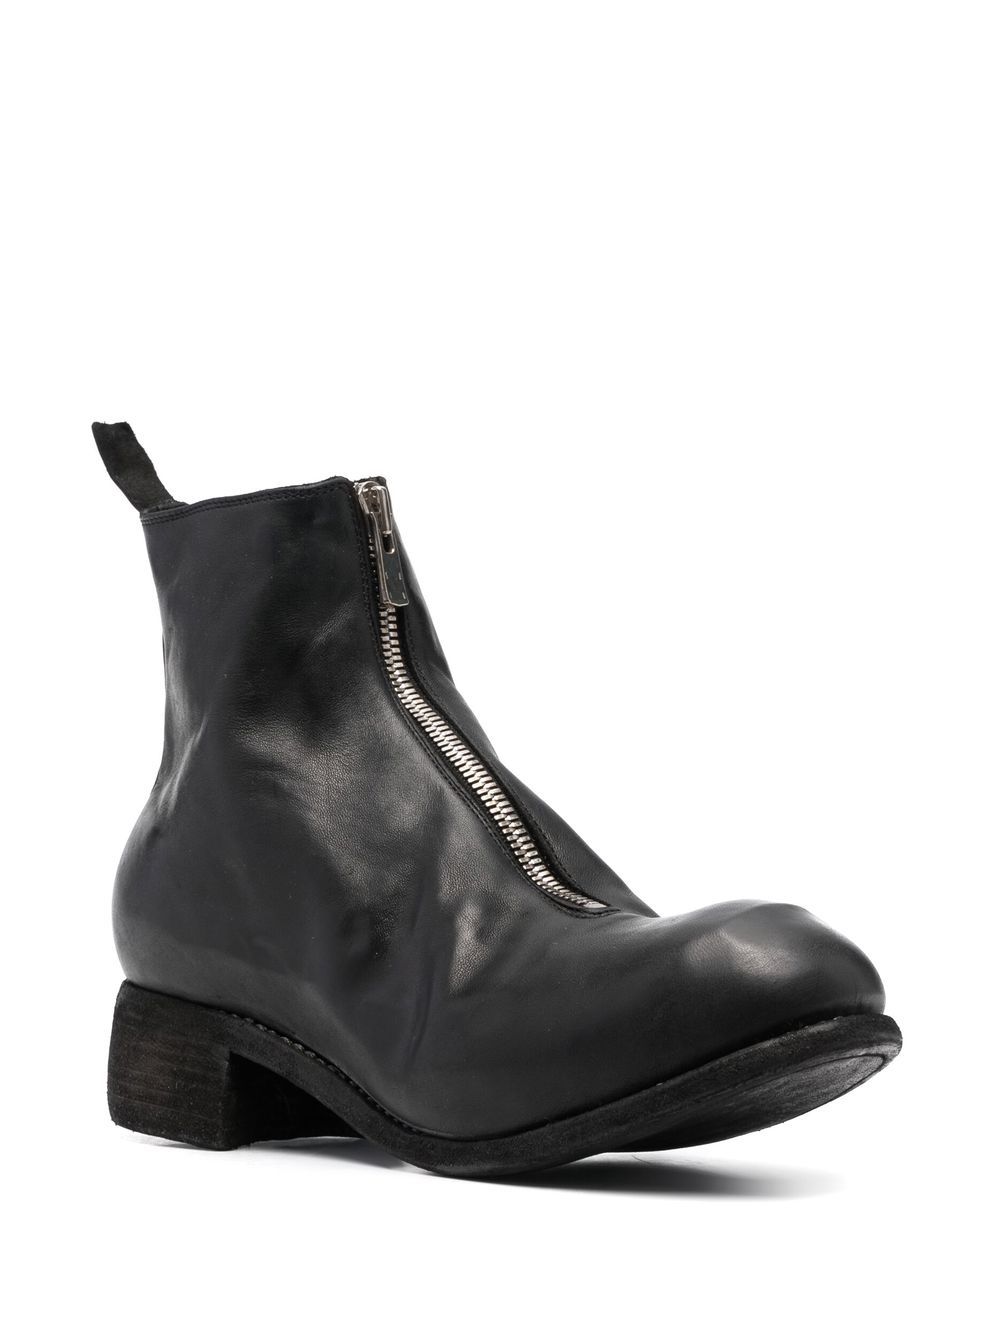 GUIDI PL1 LEATHER BOOTS